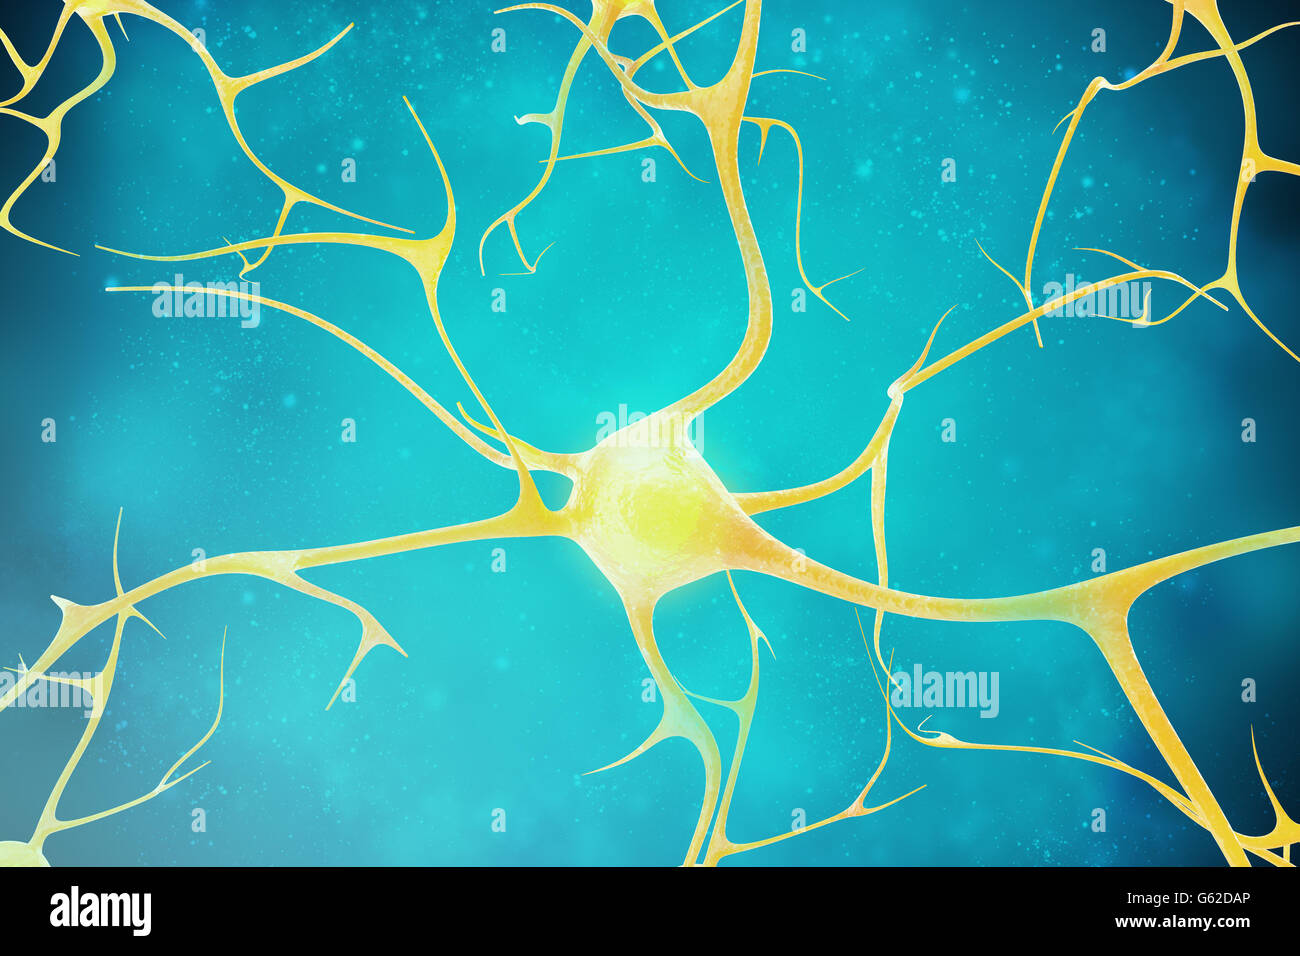 Neurons in the beautiful background. 3d illustration of a high quality Stock Photo